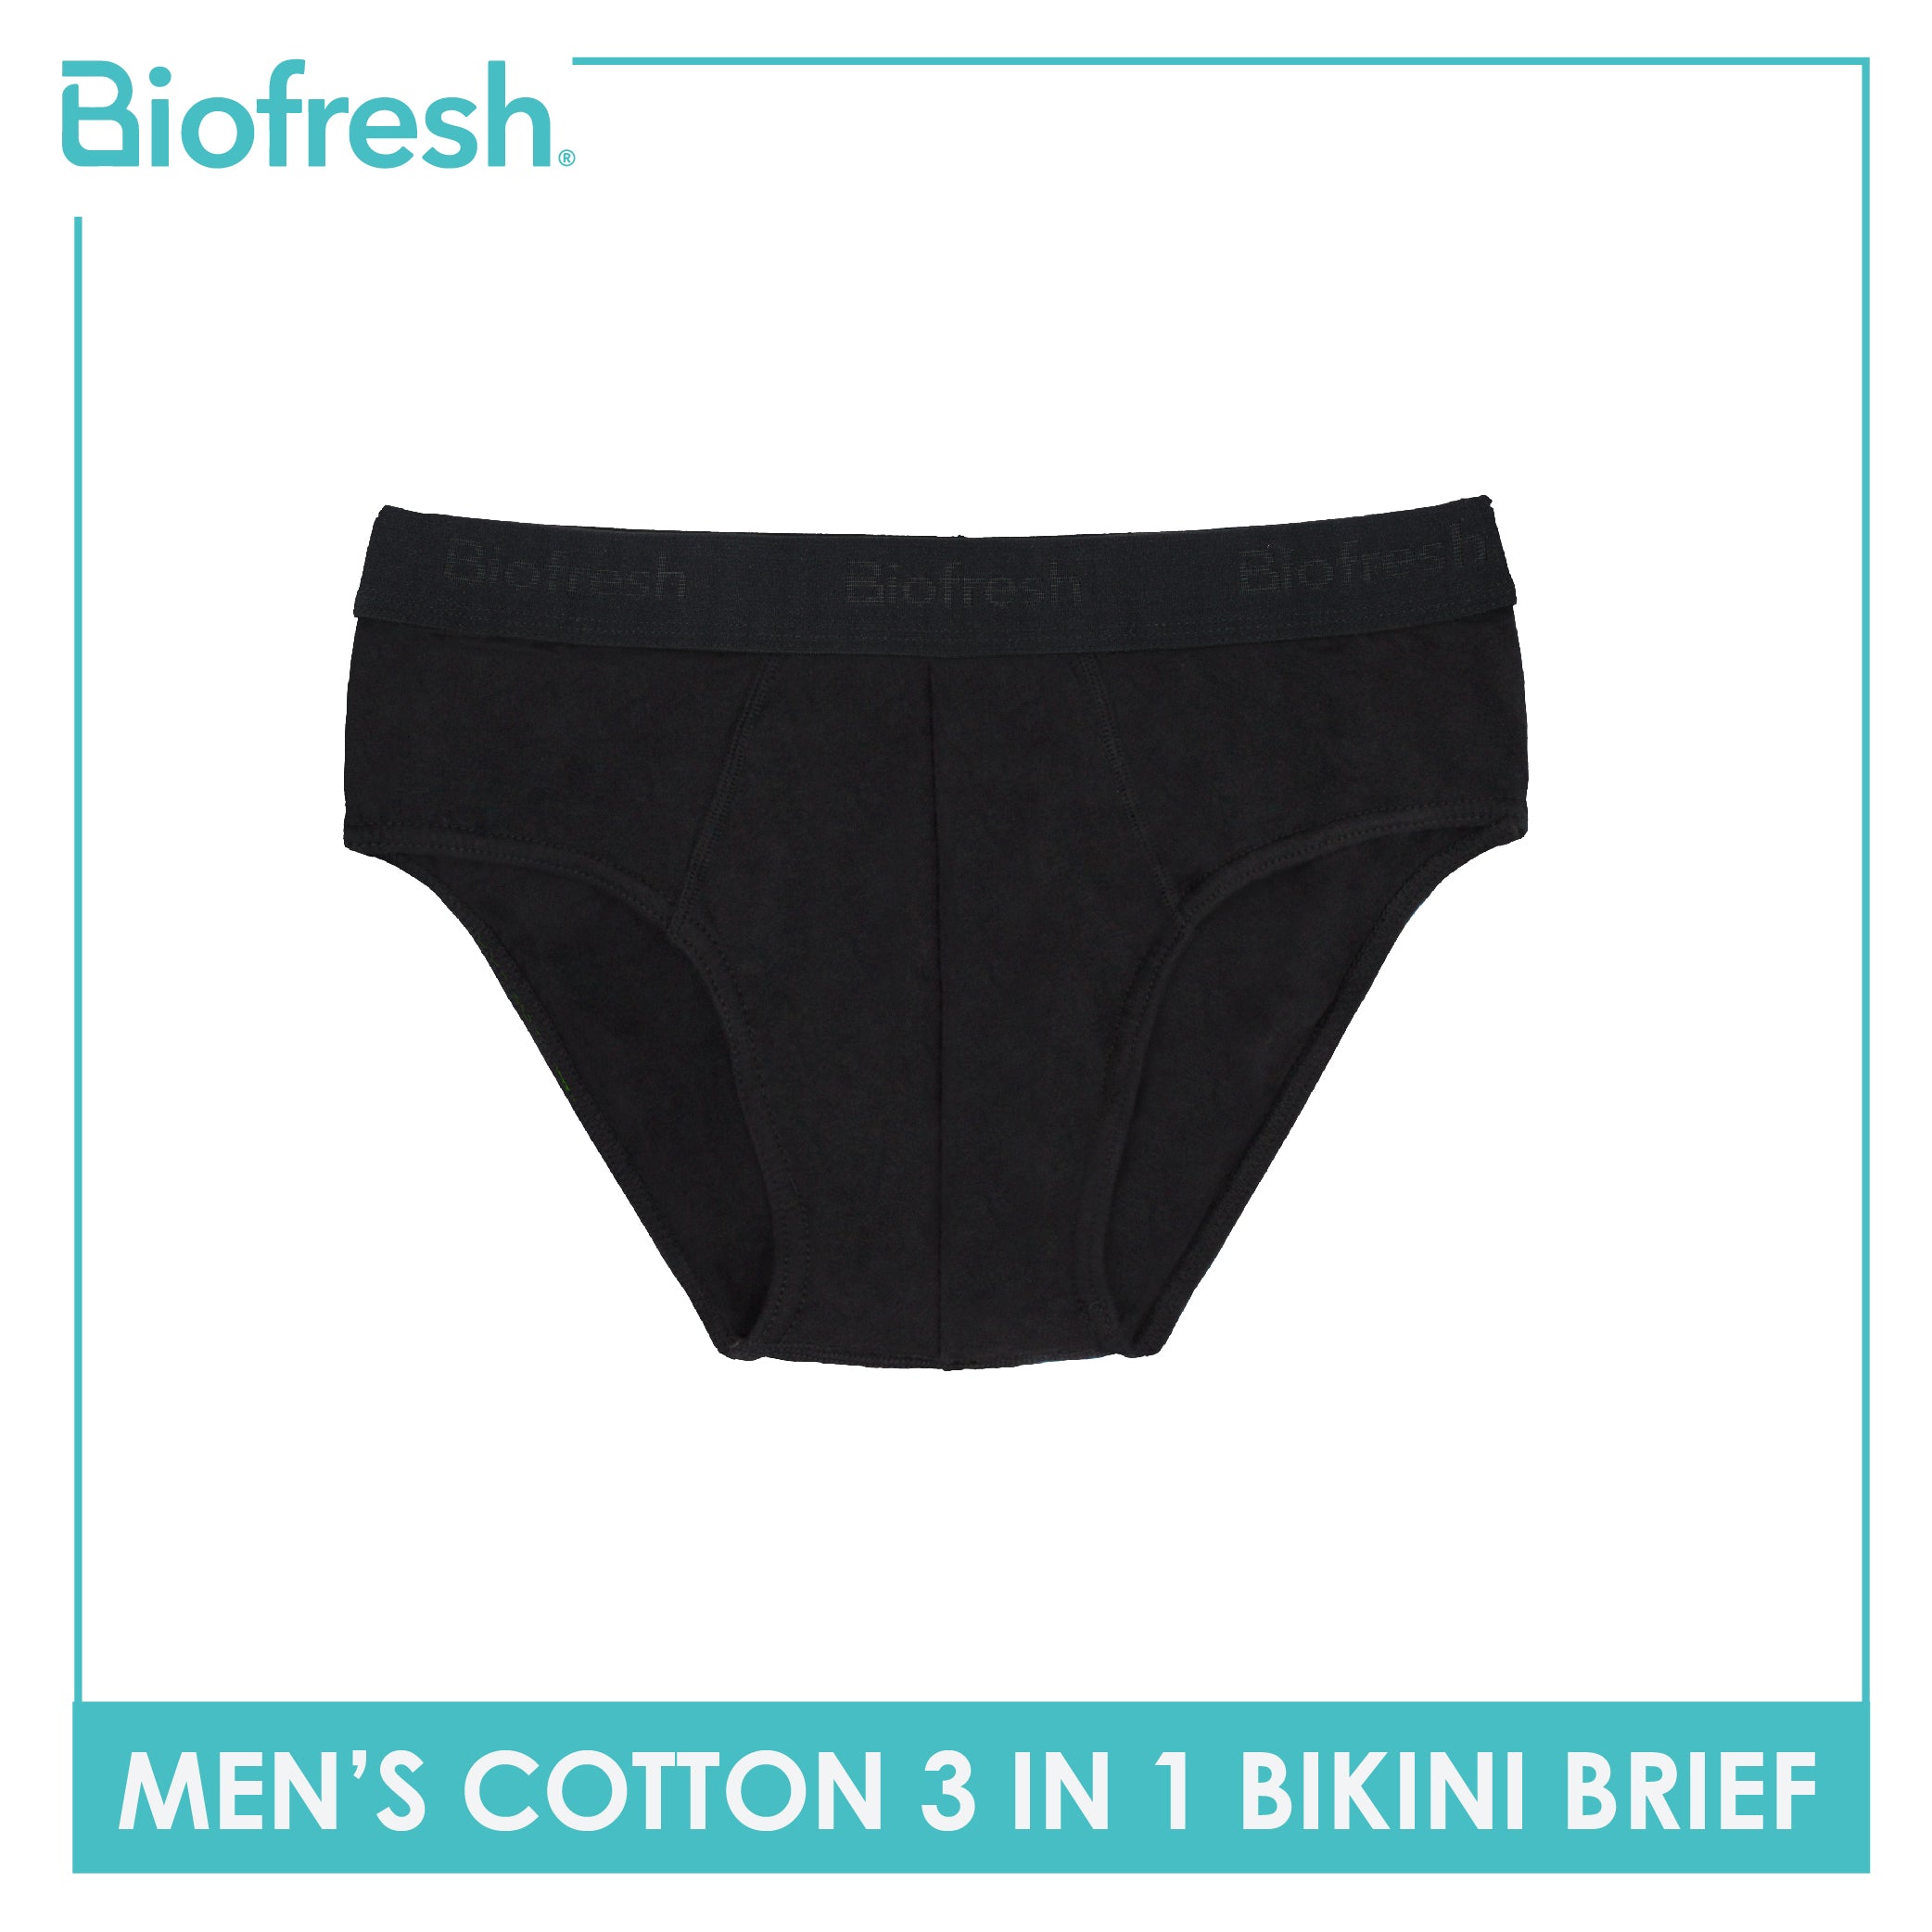 Biofresh Boys' Antimicrobial Briefs 3 pieces in a pack UCBCG14